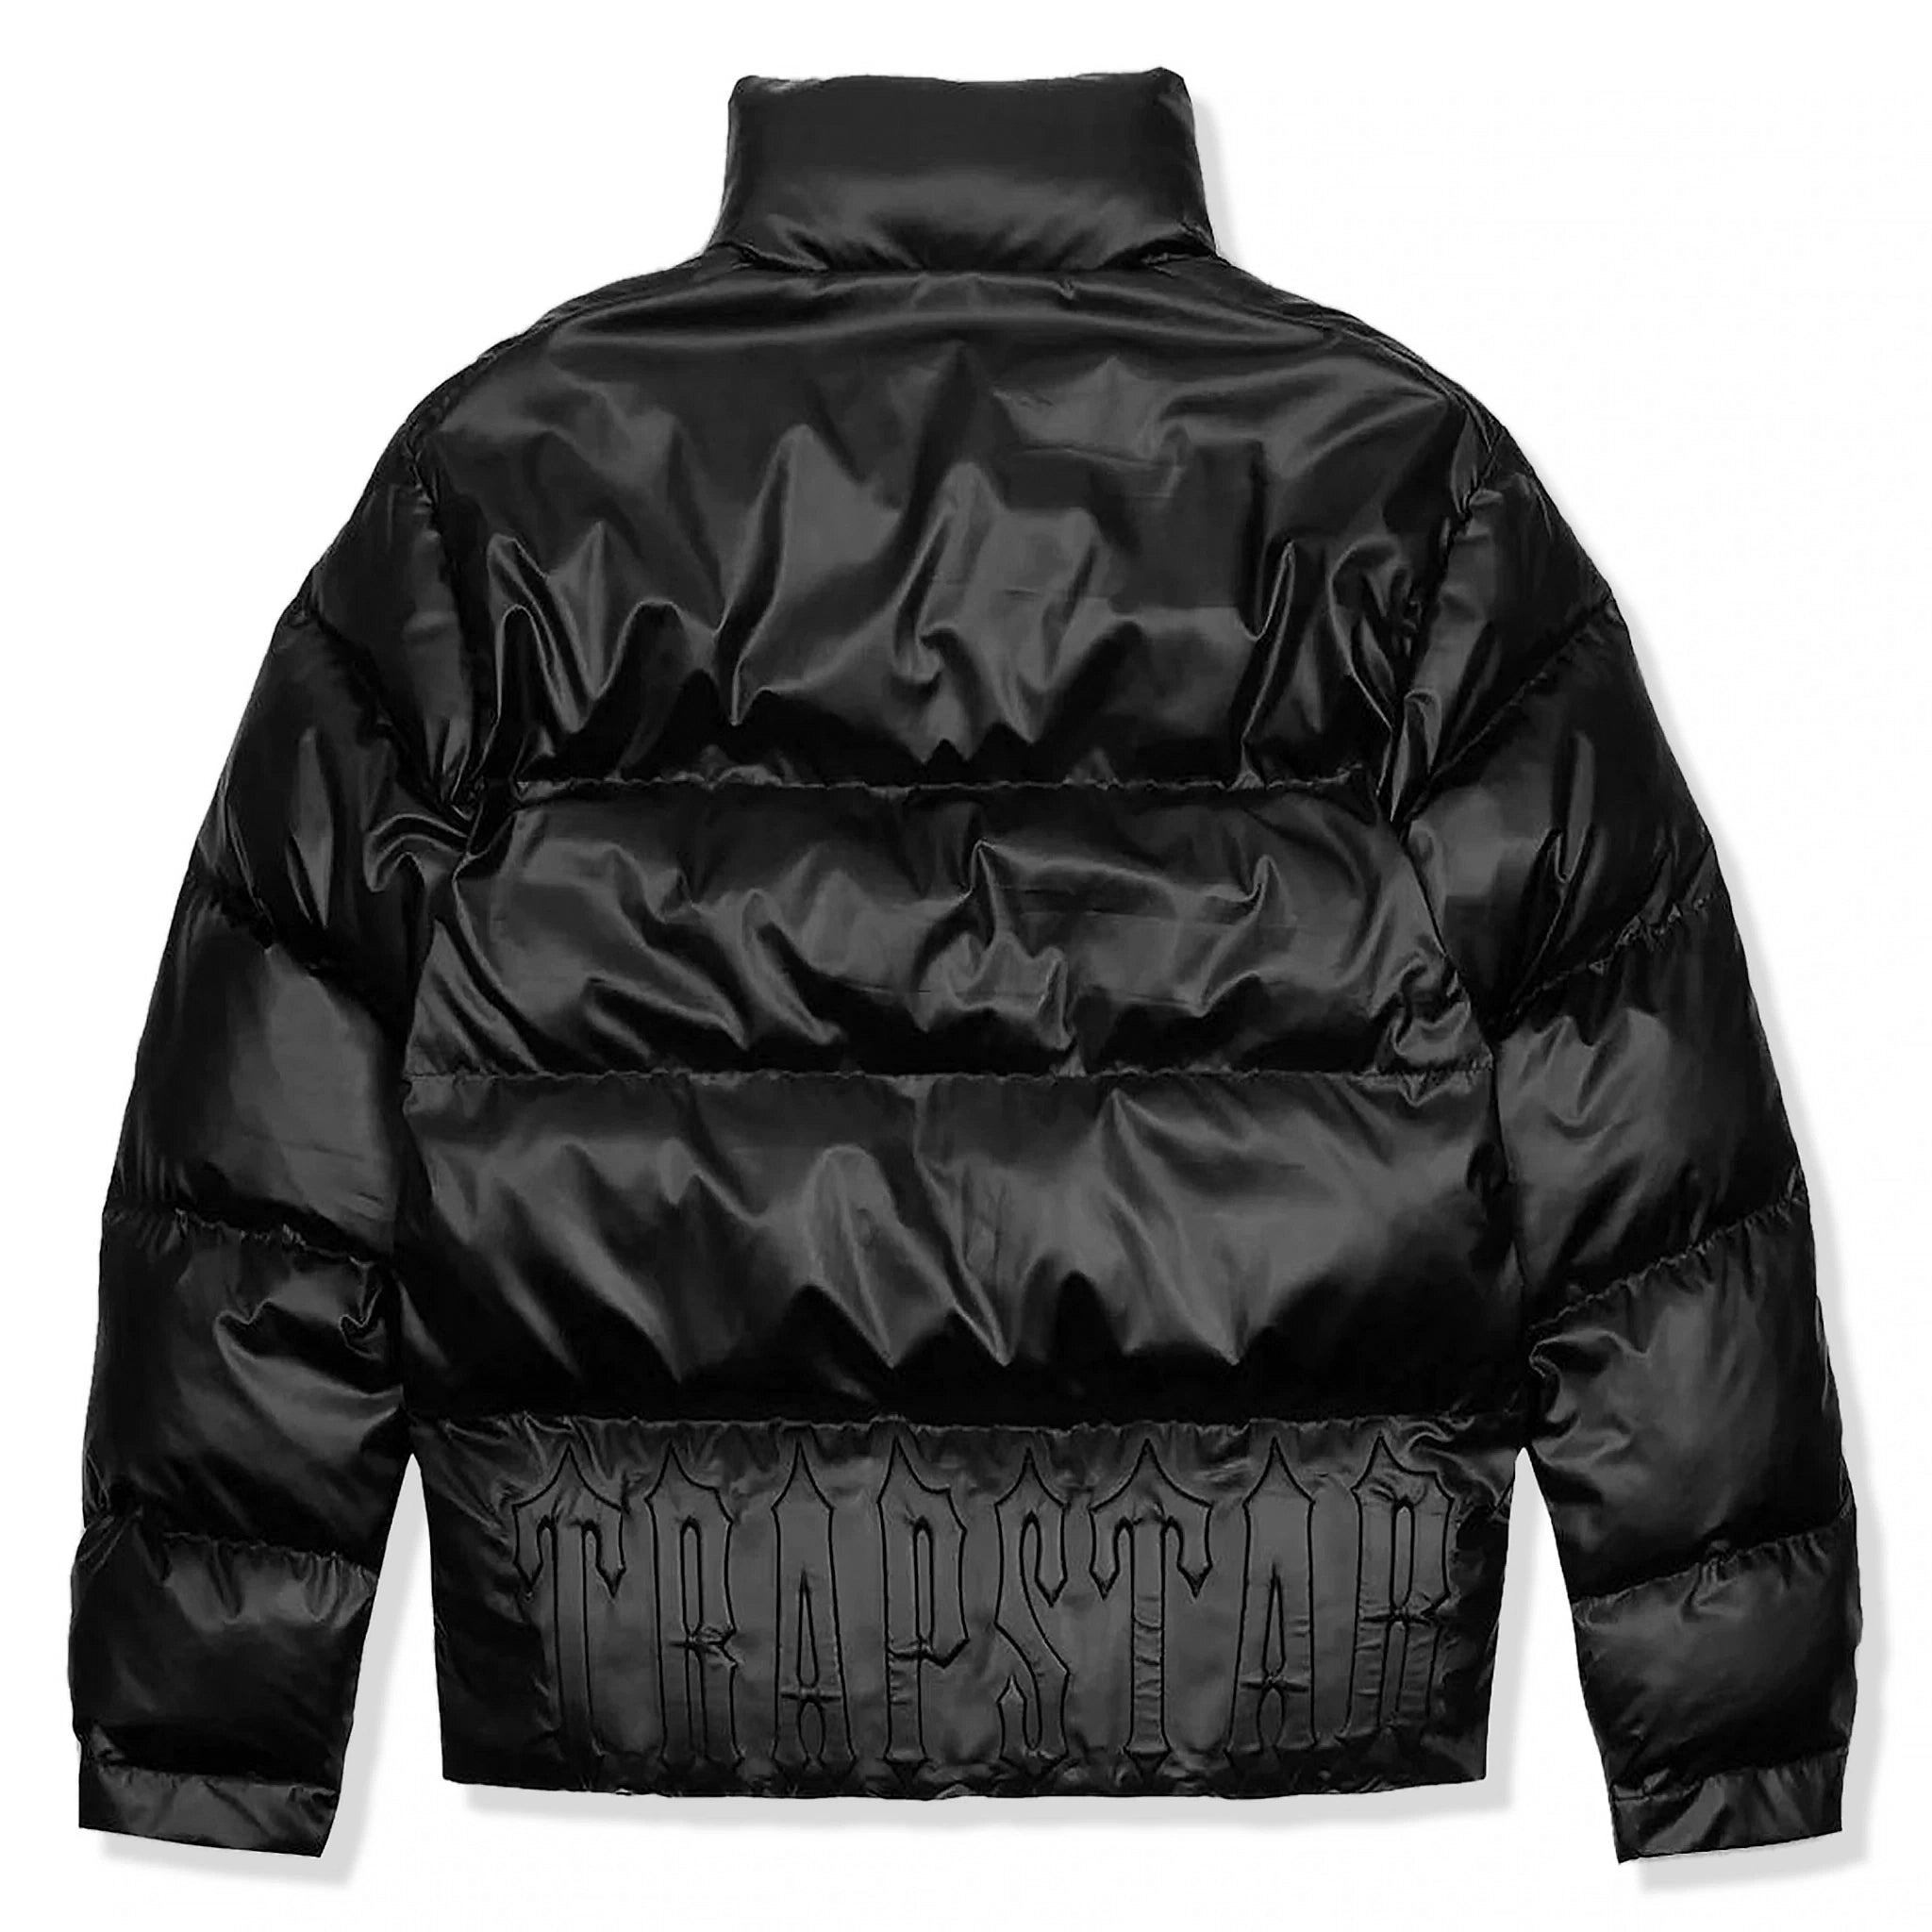 Back view of Trapstar Irongate Embossed Black Puffer Jacket